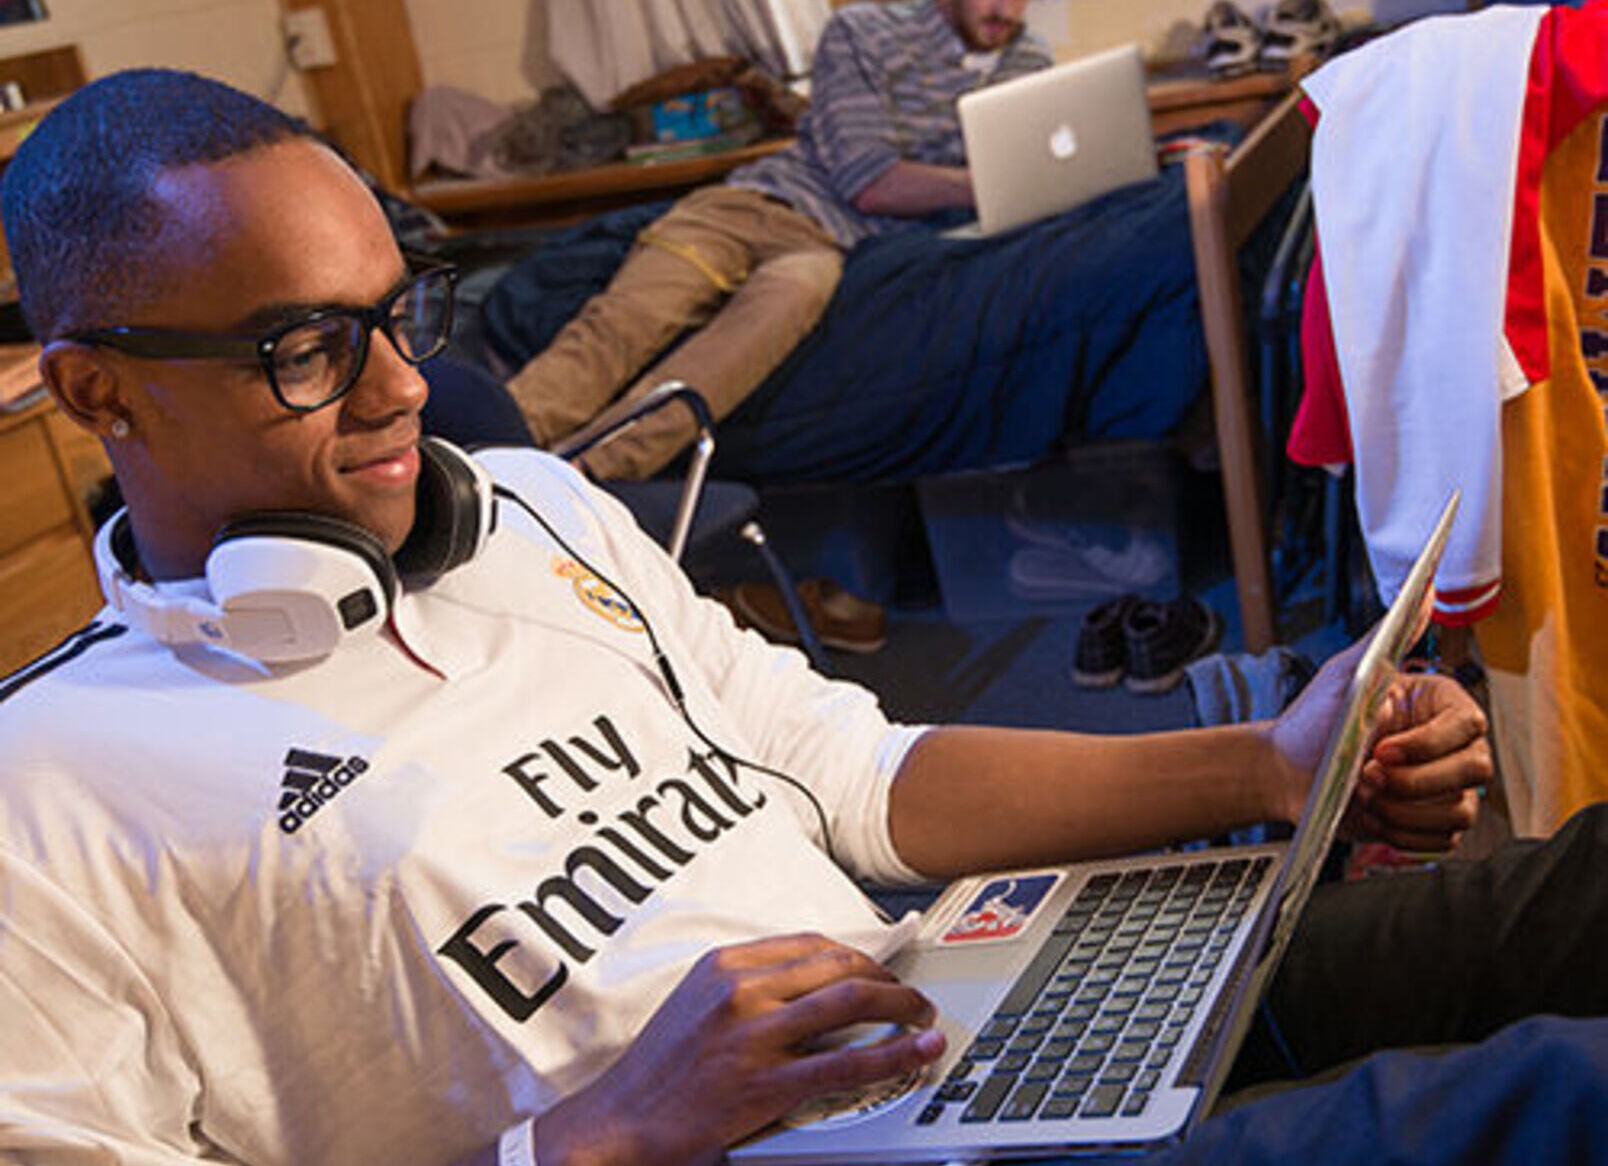 A student works on a laptop in a dorm room